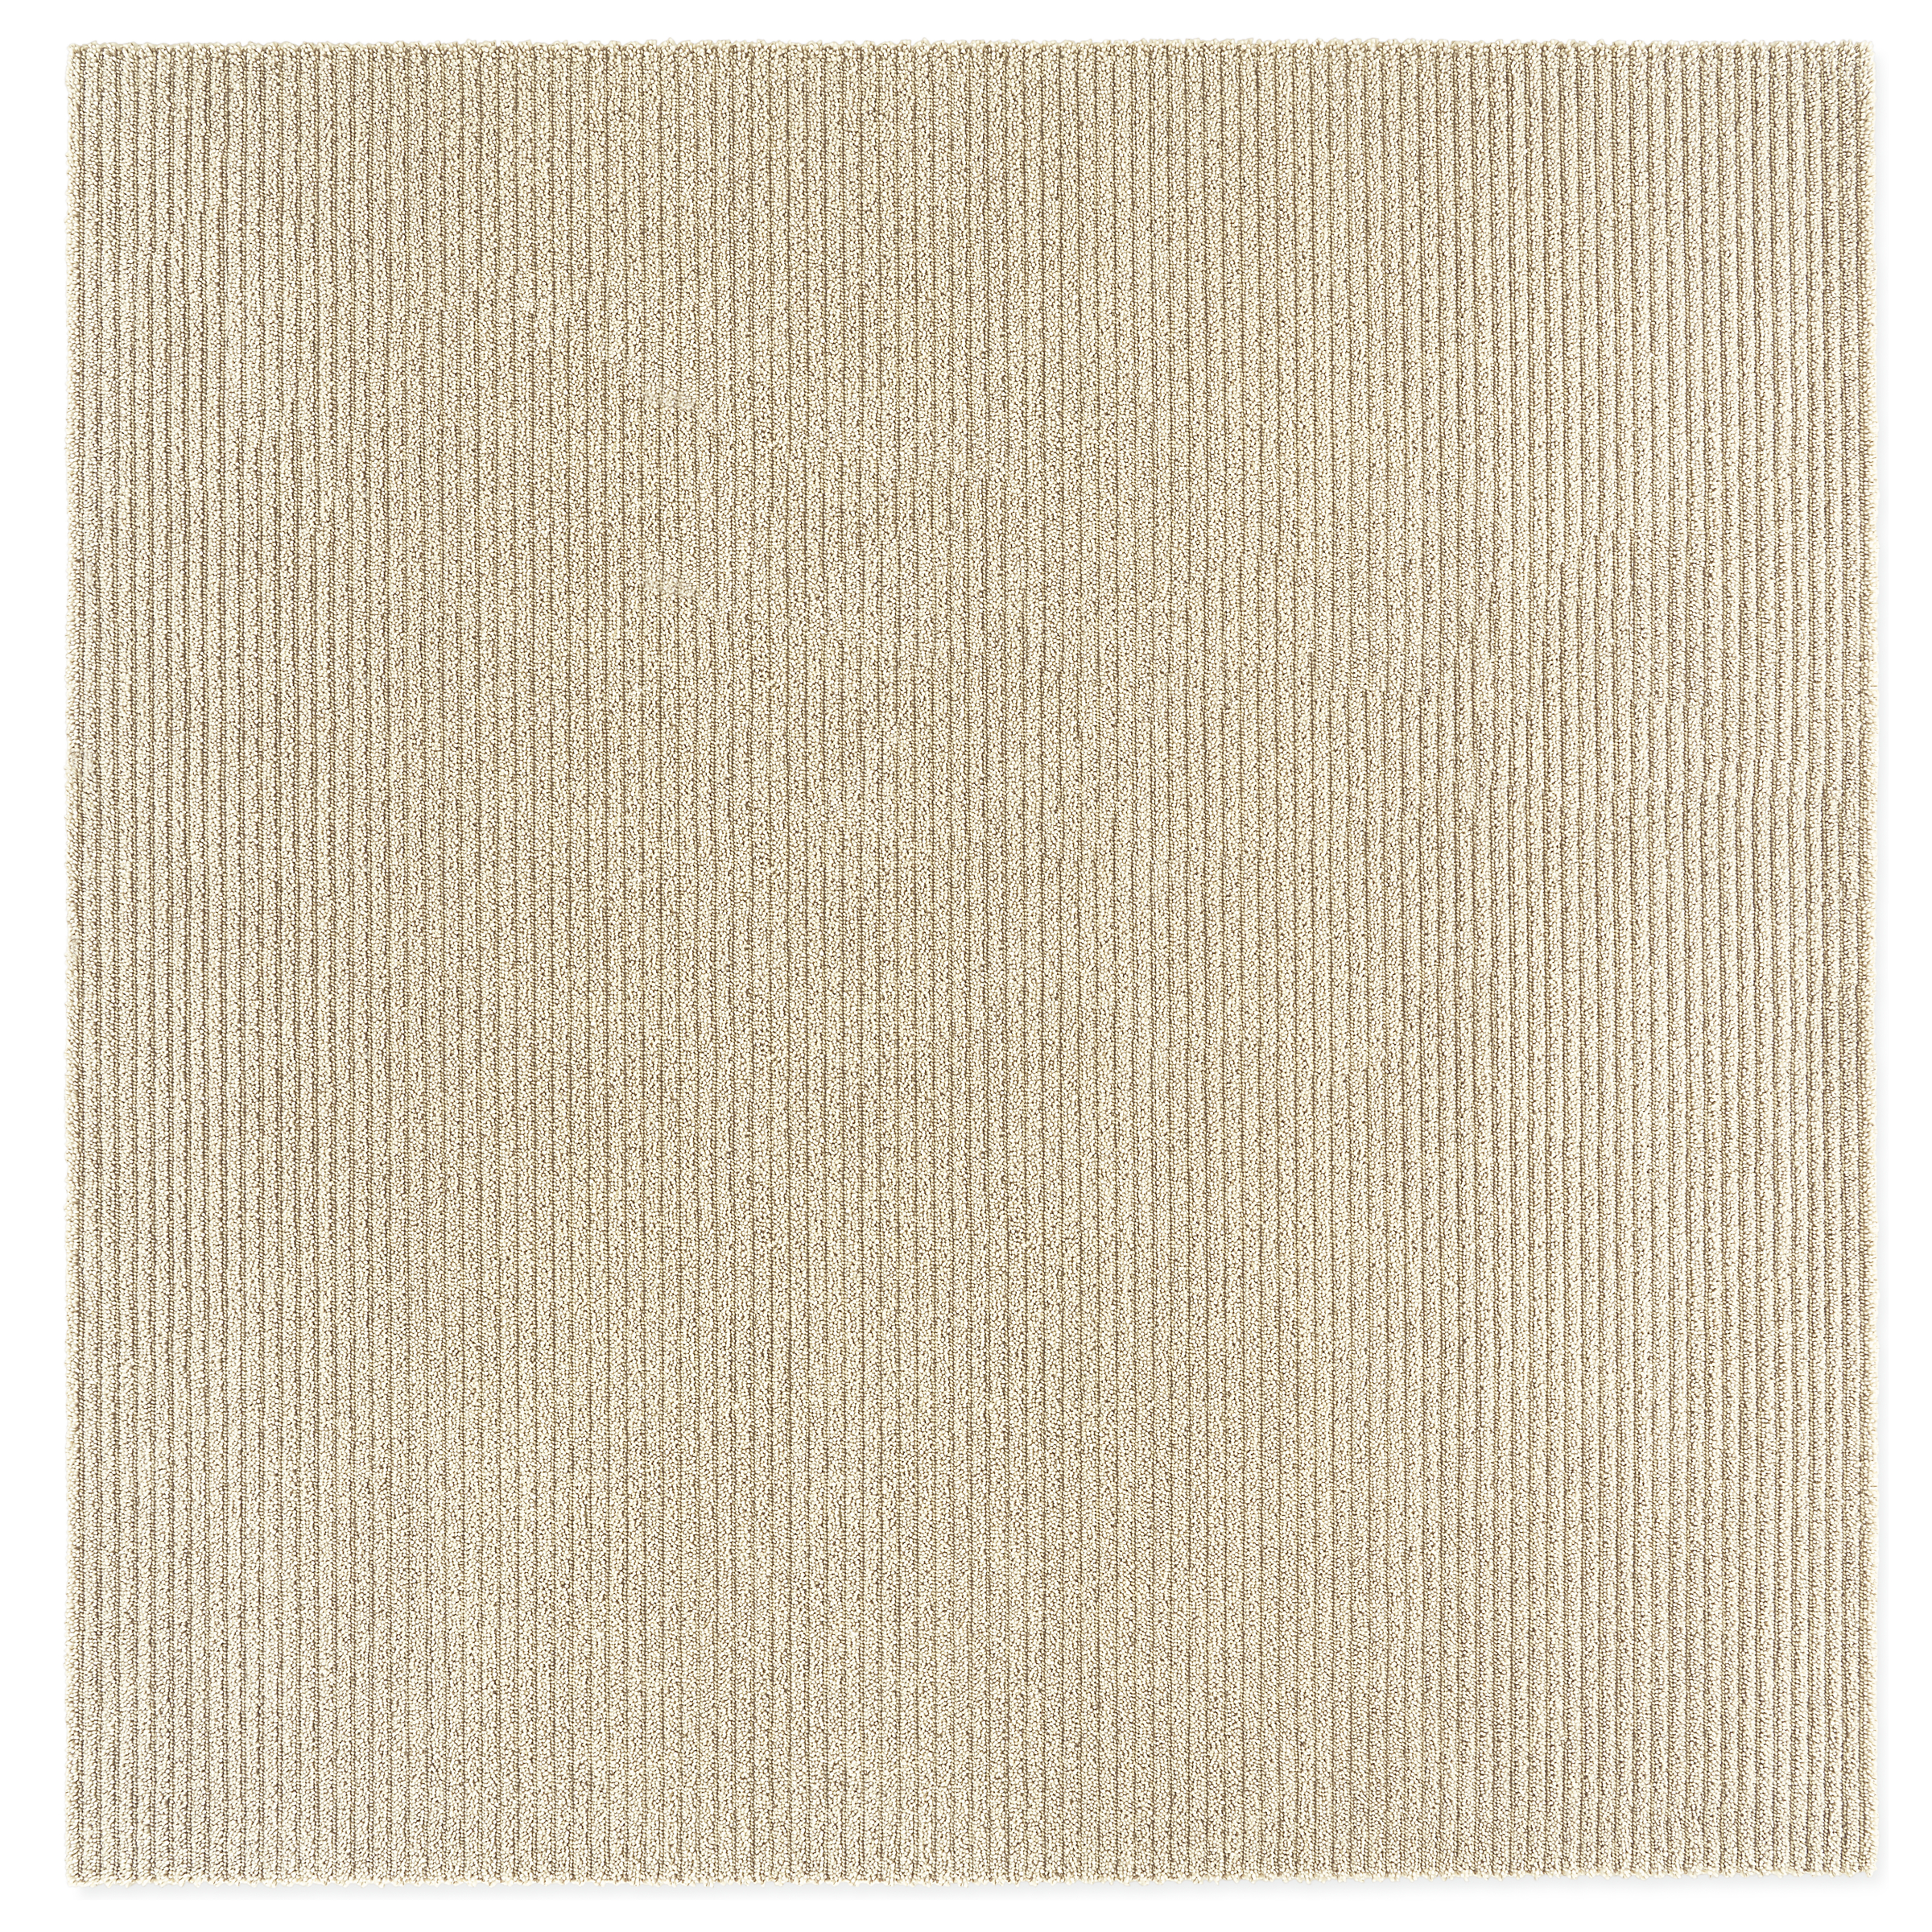 Arden Ribbed 7'8" Square Rug in Ivory/Taupe